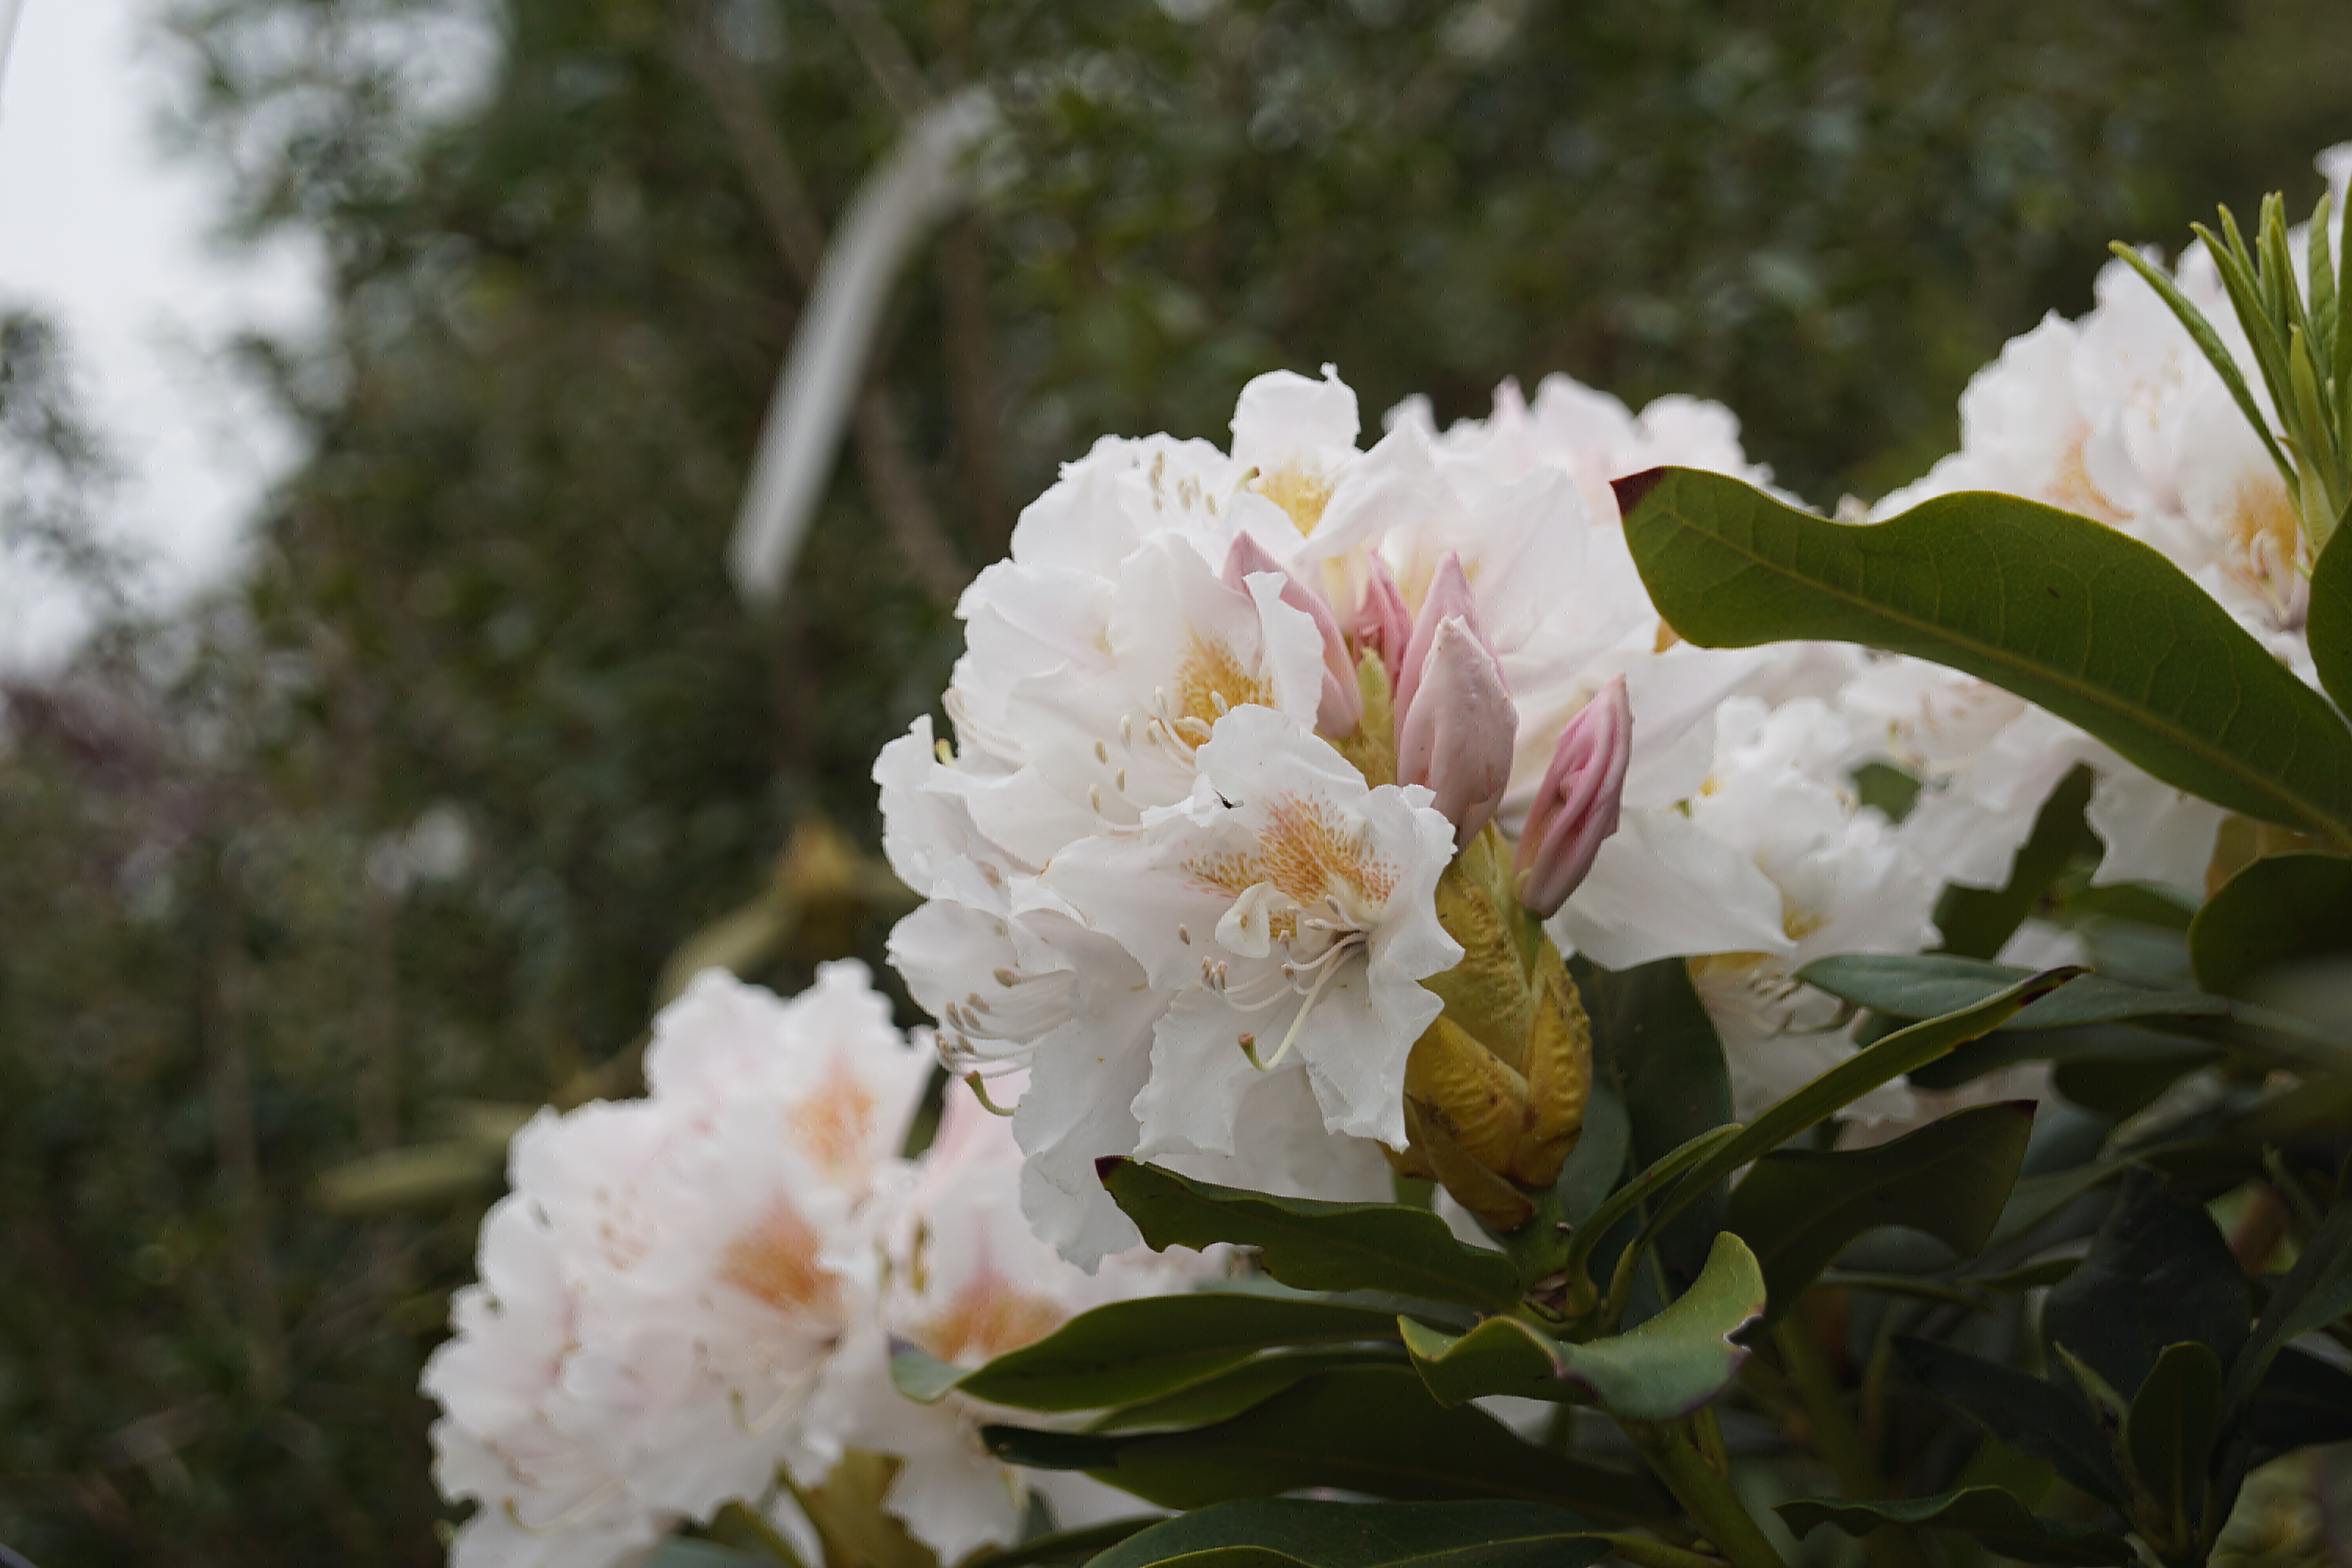 Rhododendron 'Cunningham's White' (10)